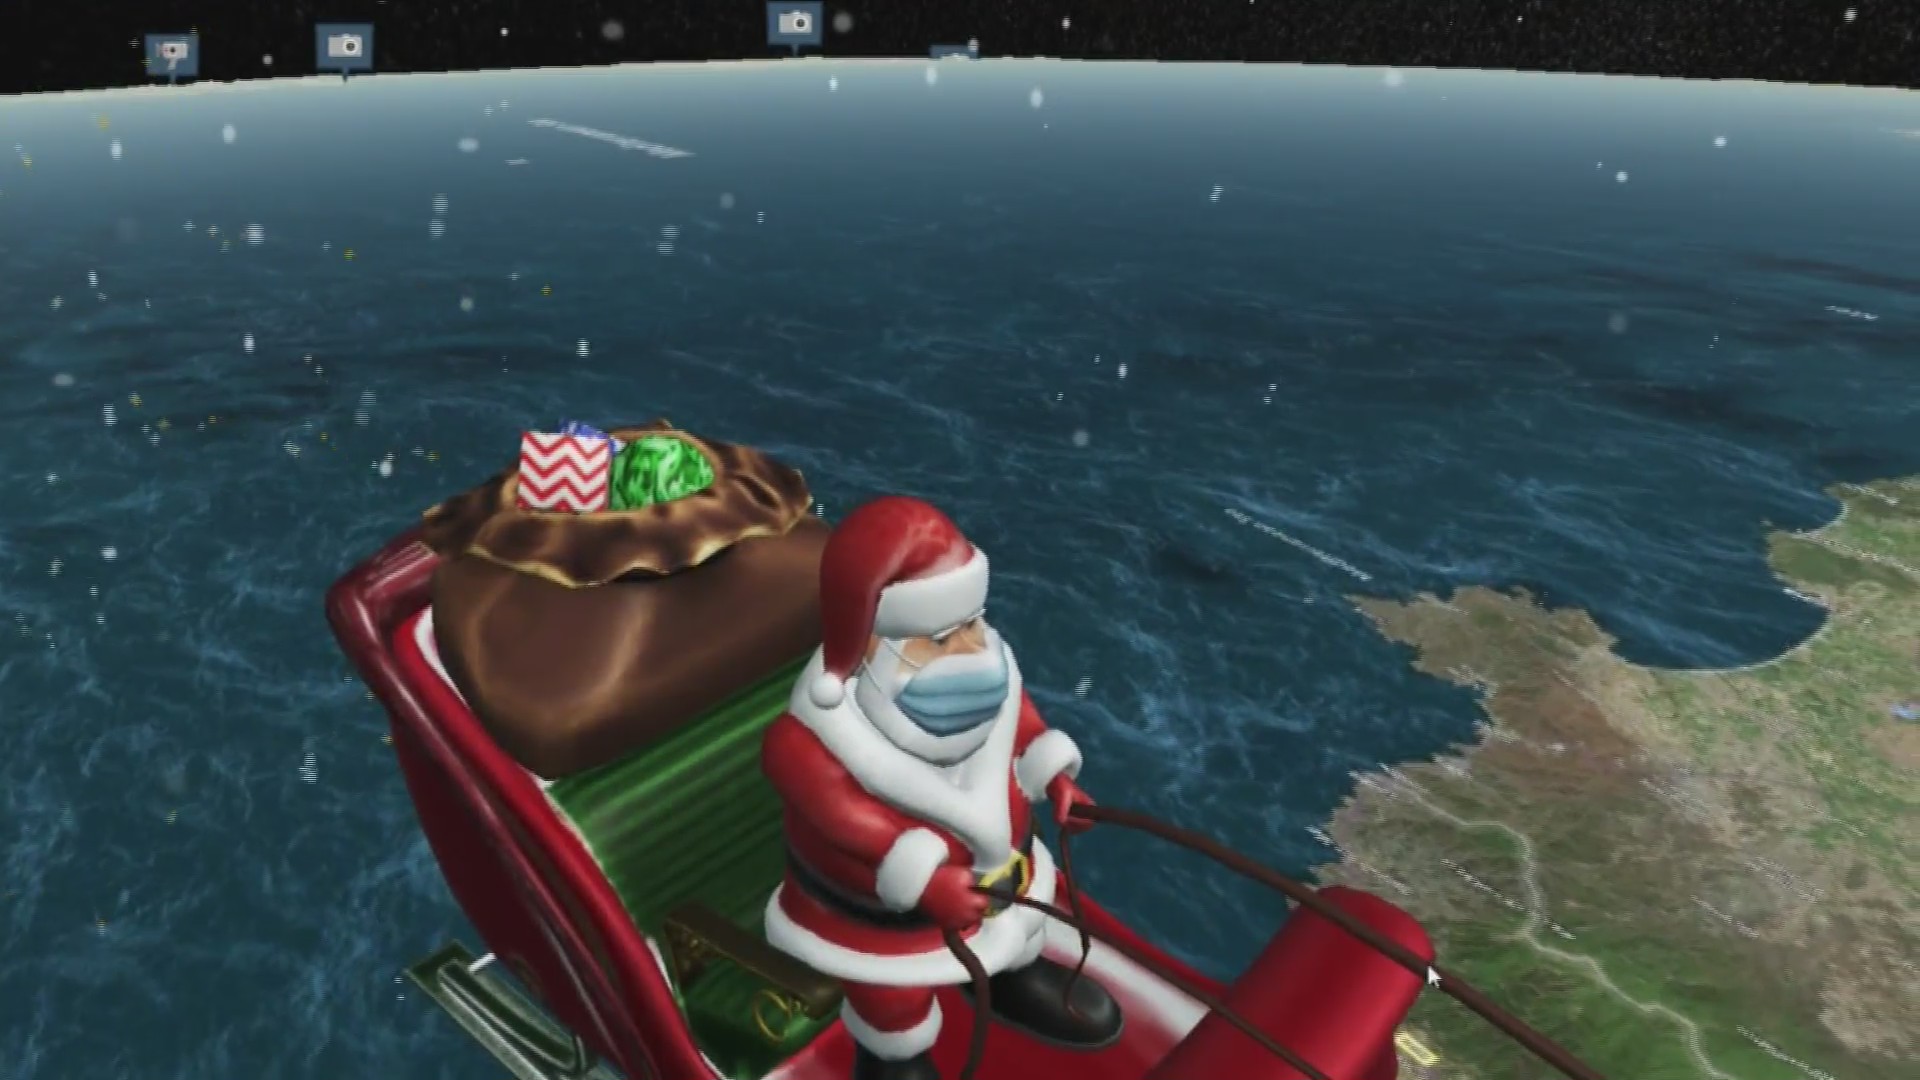 NORAD accompanies Santa Claus on his gift-giving journey around the world